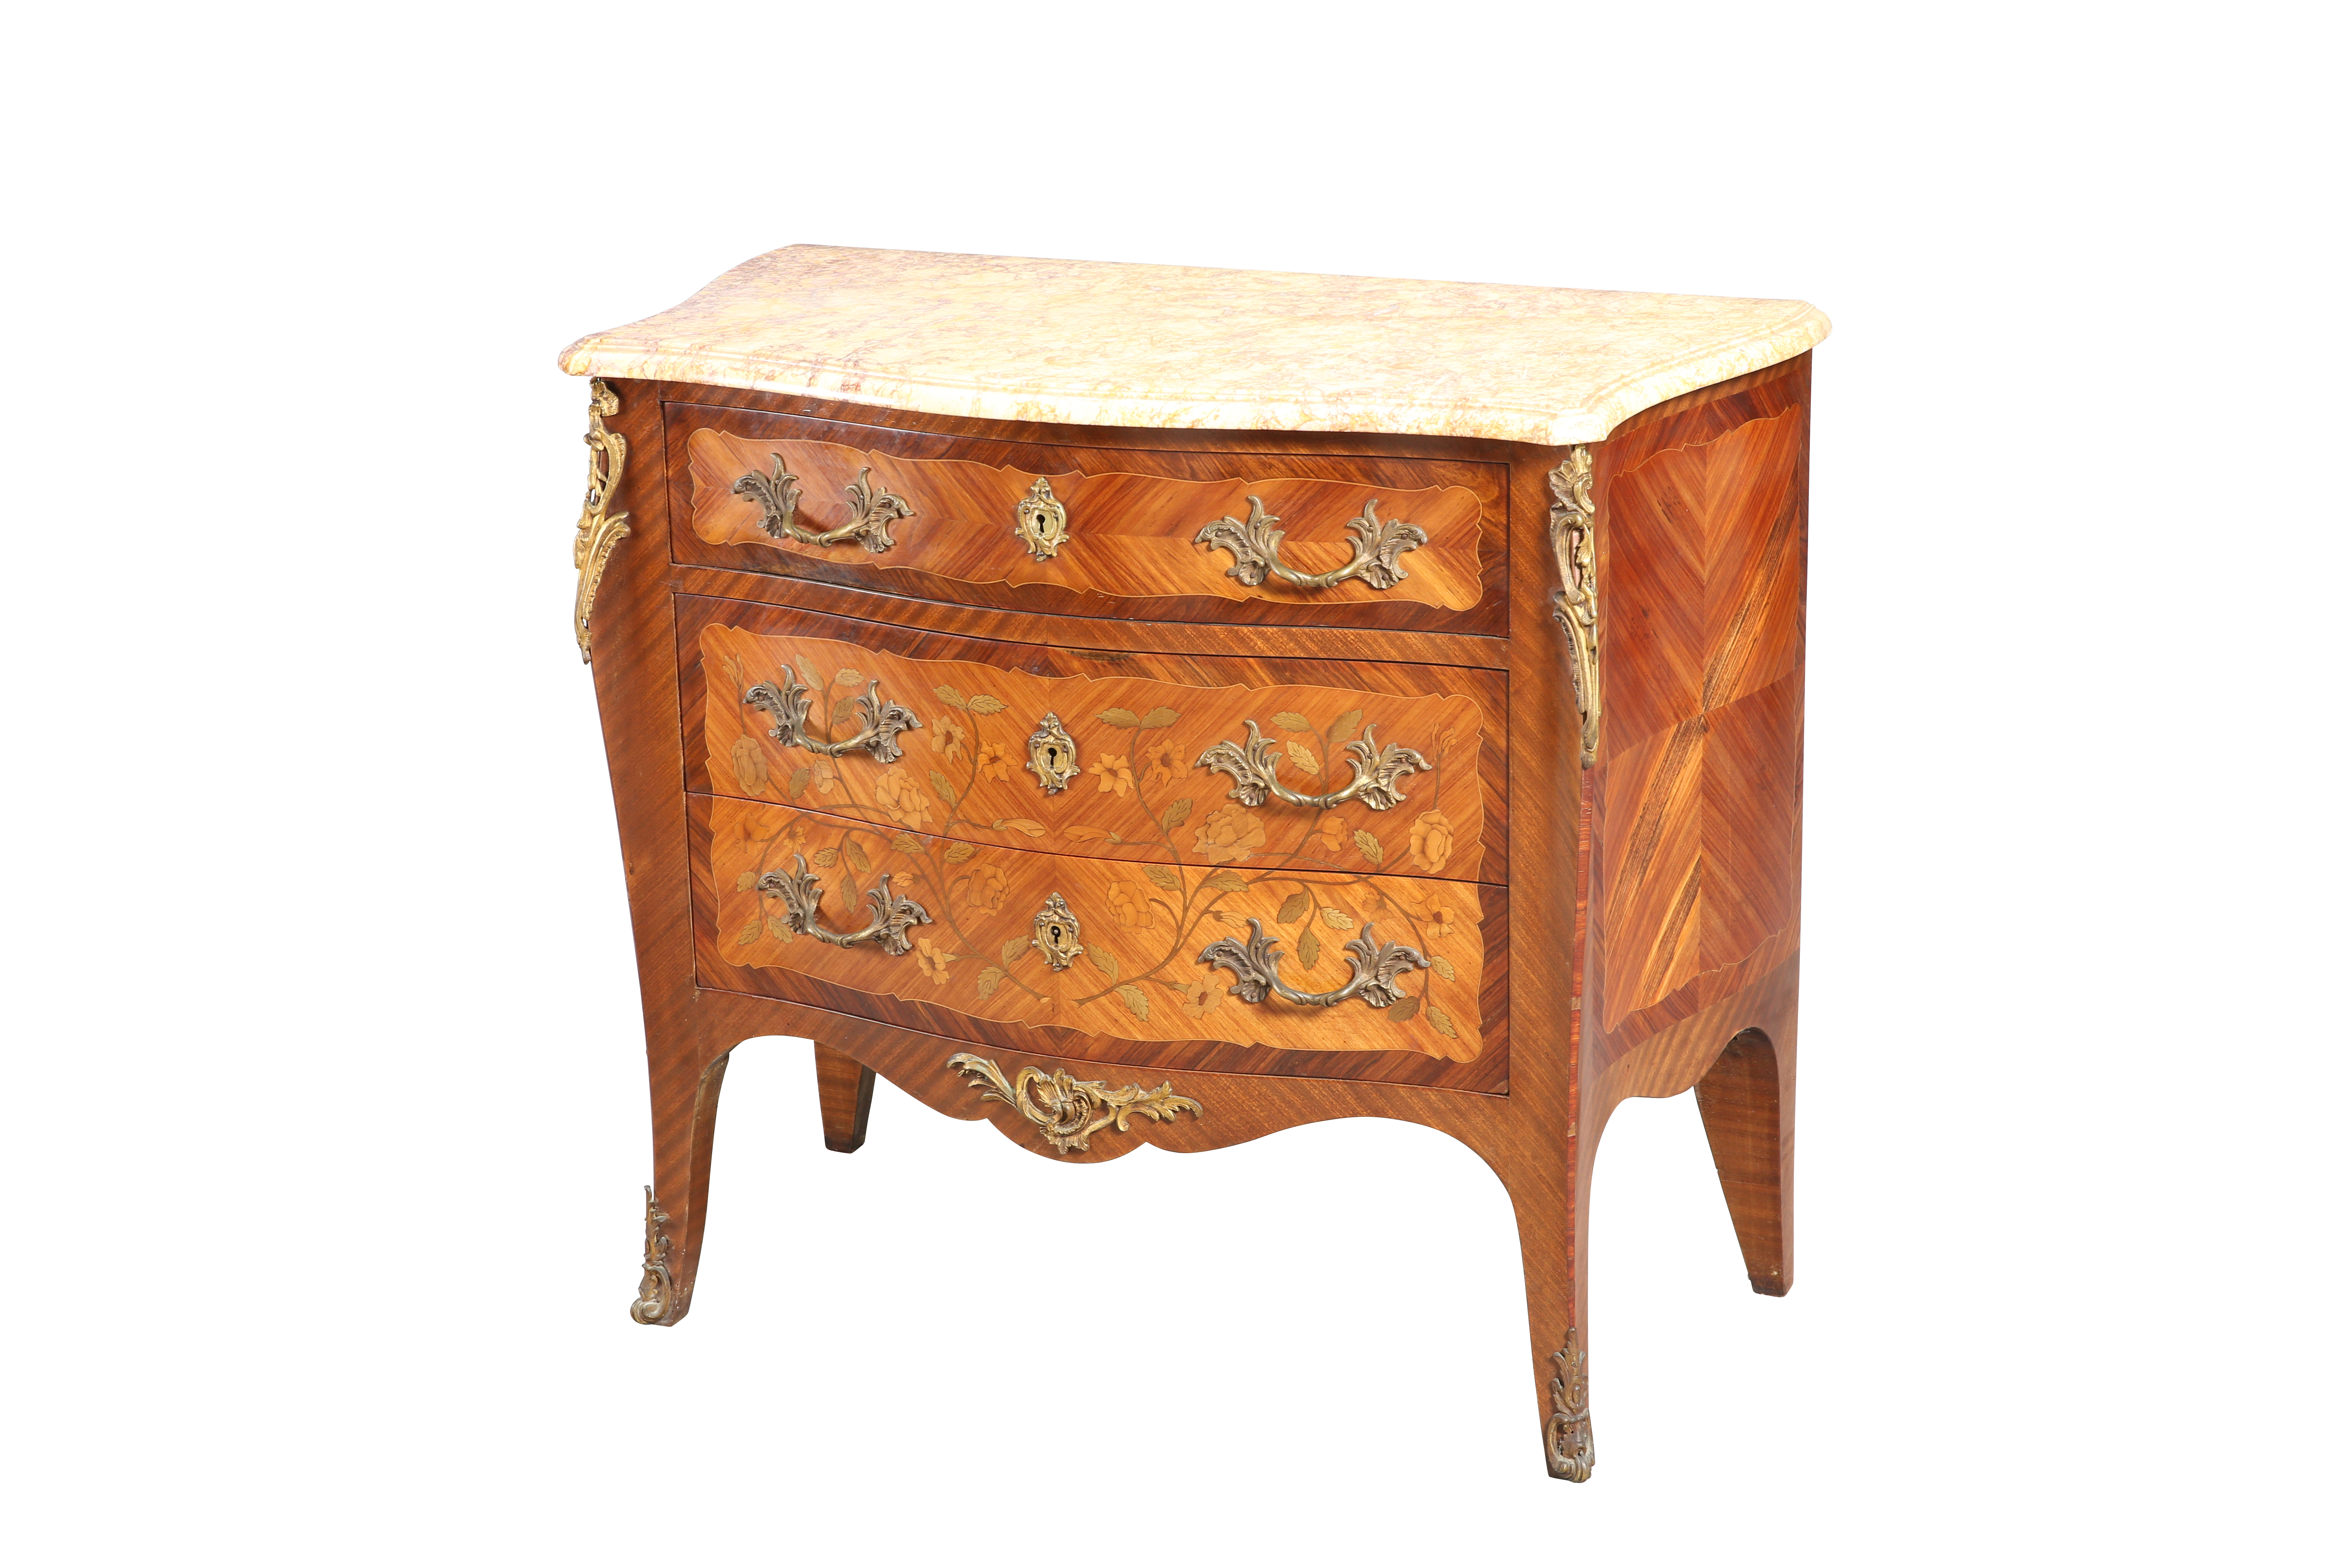 A LOUIS XV STYLE MARBLE-TOPPED FLORAL MARQUETRY COMMODE